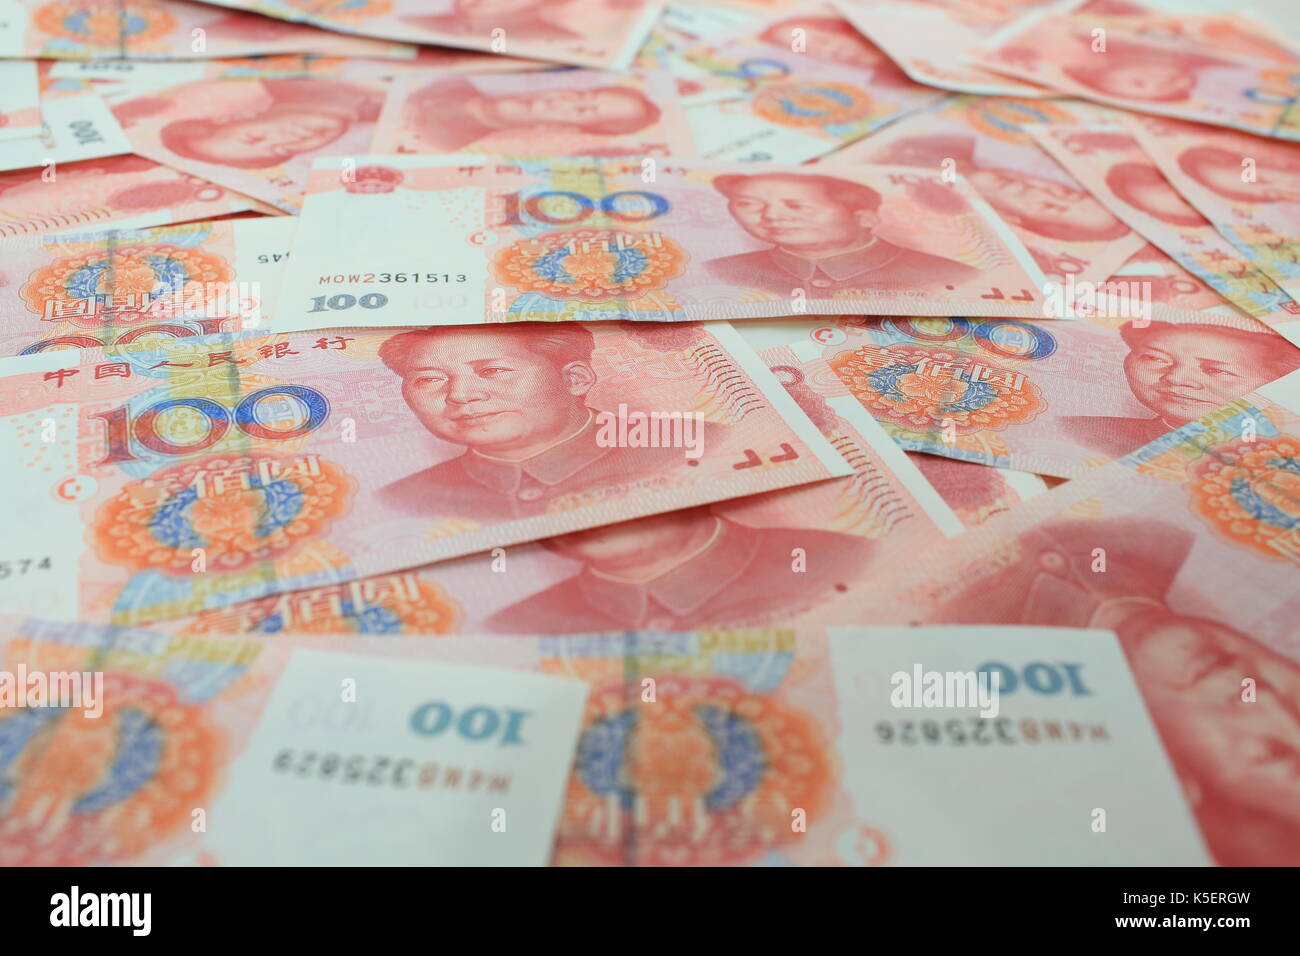 mess chinese yuan money 100 rmb background with Mao Zedong portrait old money Stock Photo